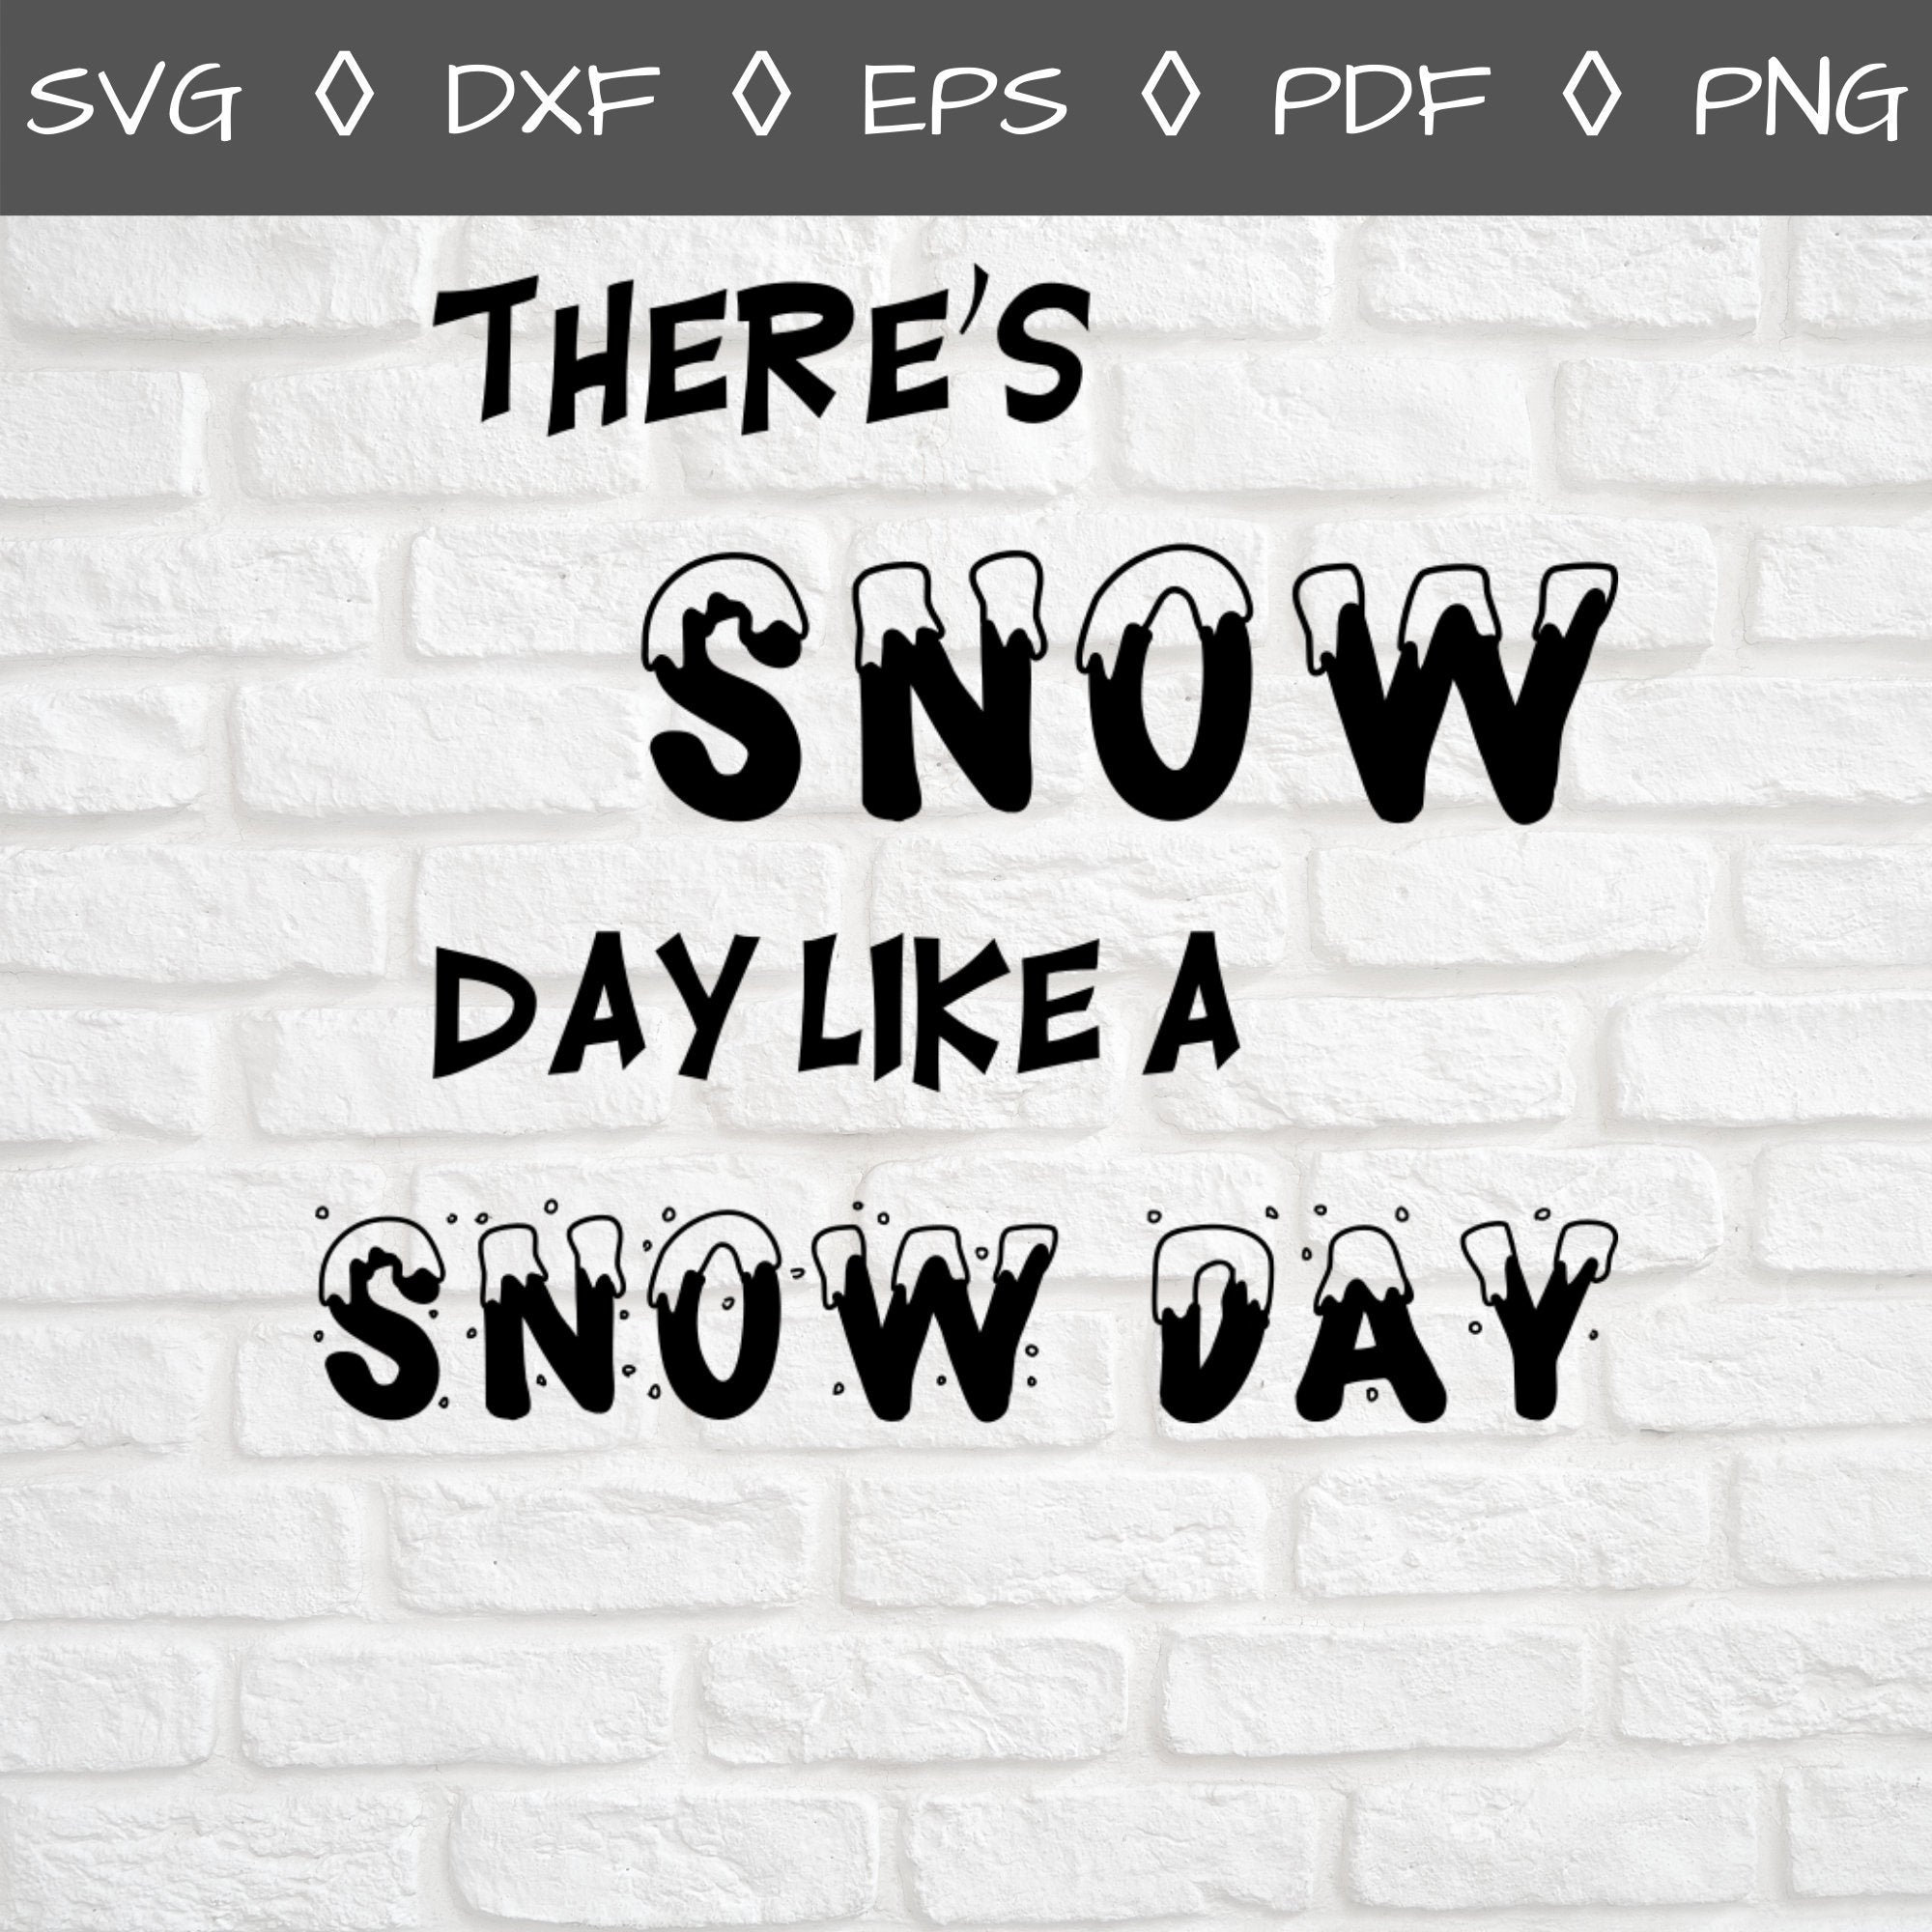 There's Snow Day Like a Snow Day SVG Teacher Gifts | Etsy